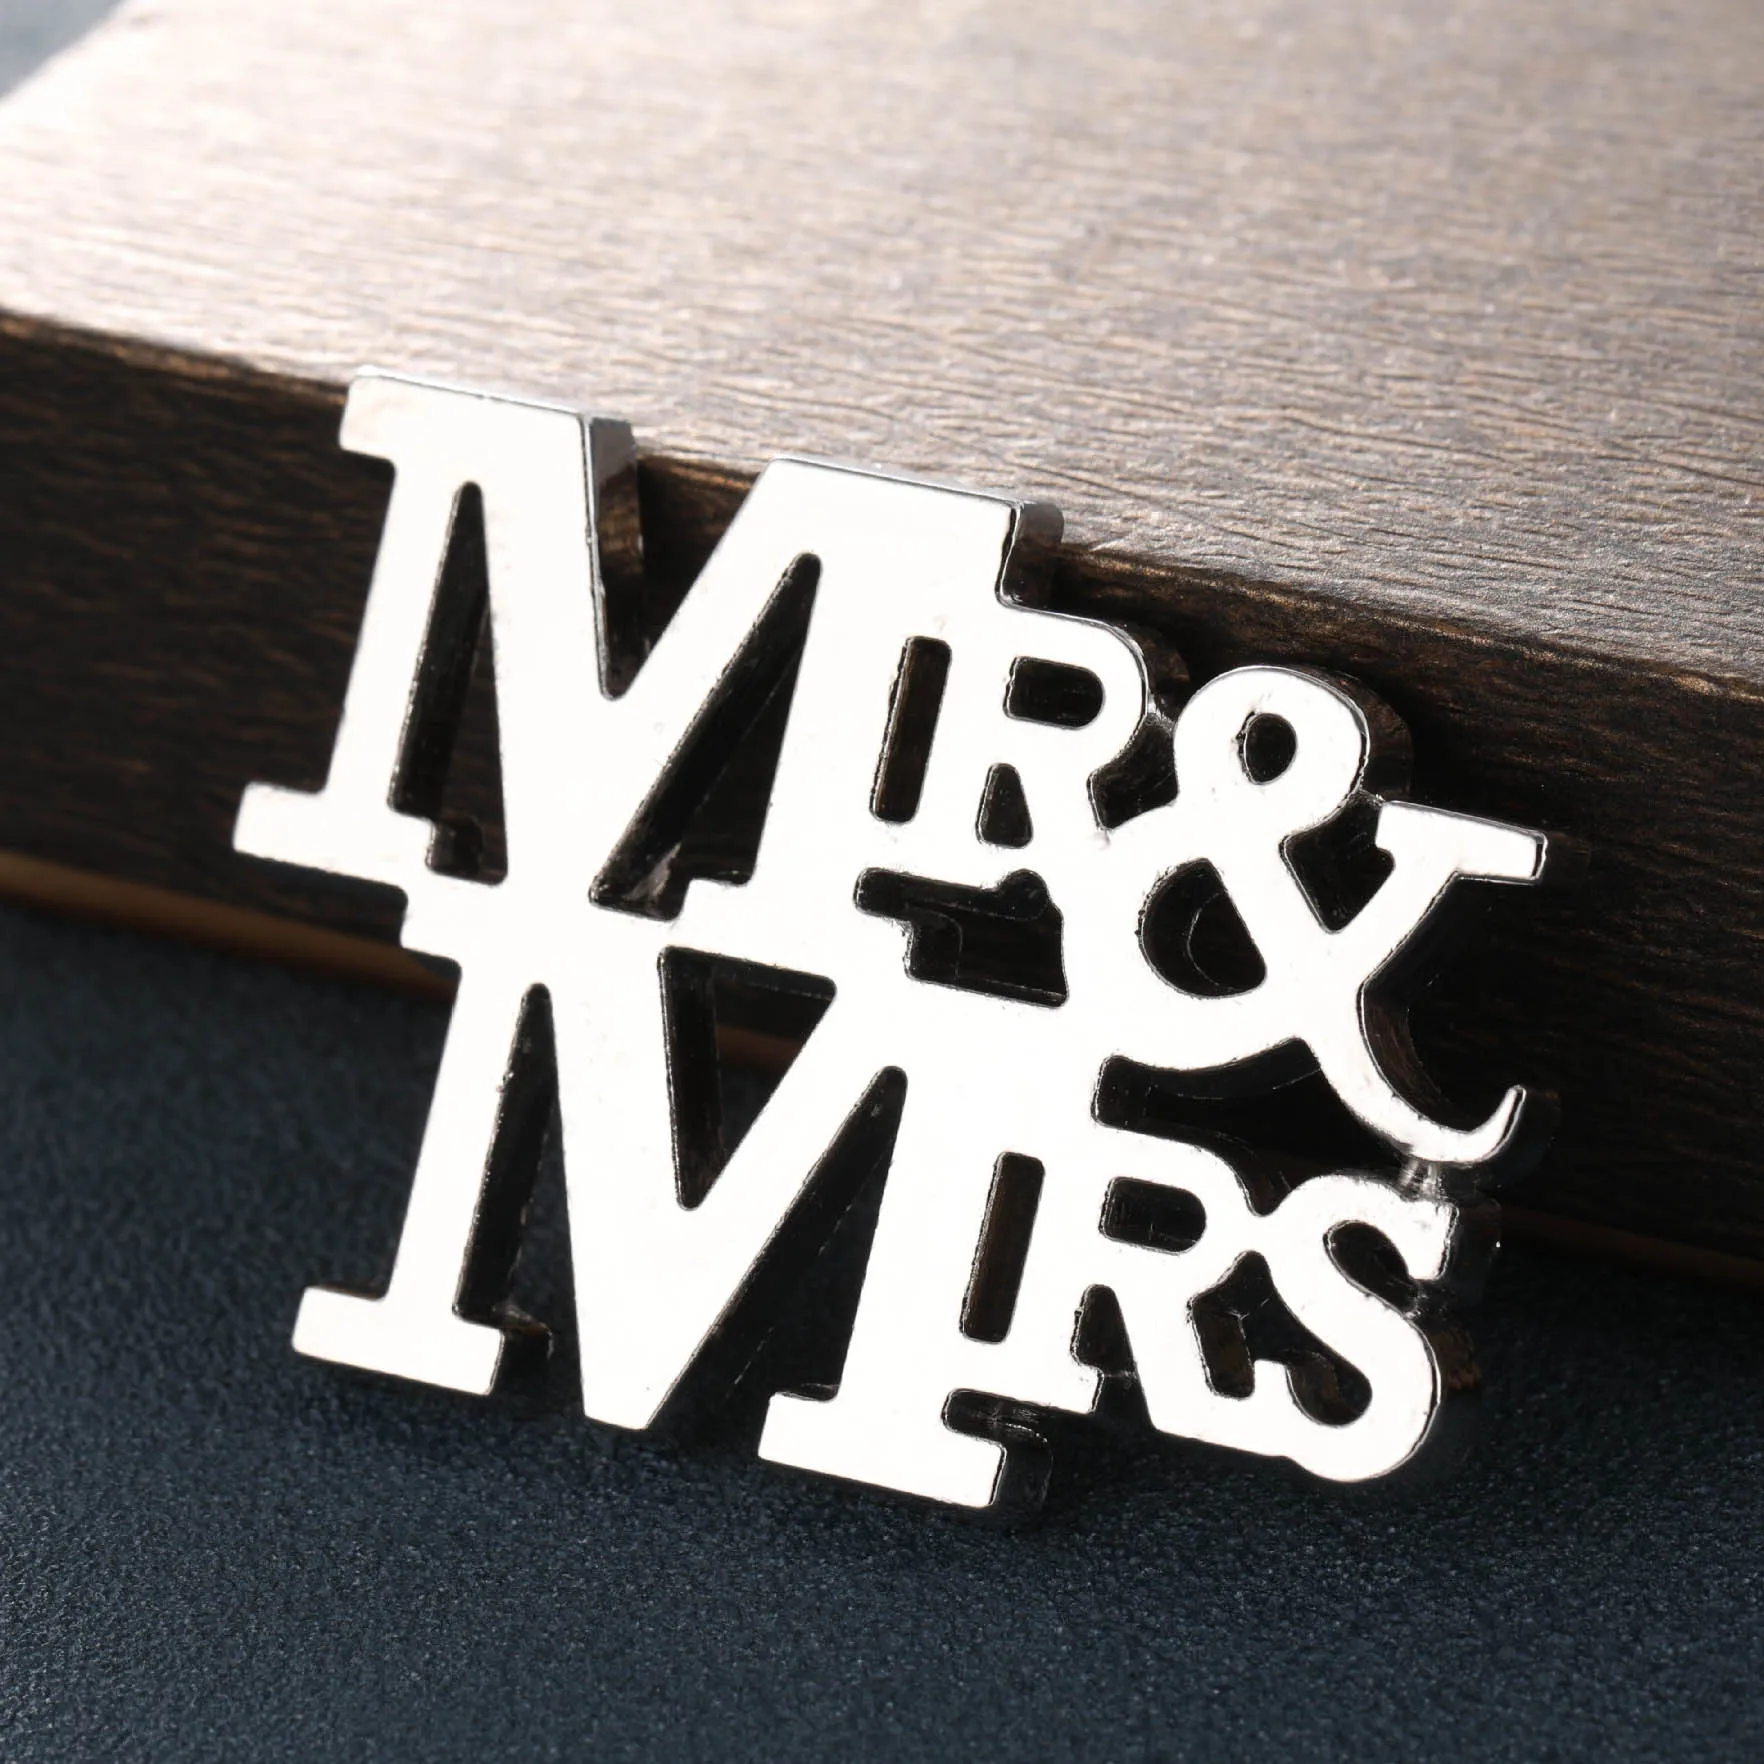 Ywbeyond Mr. & Mrs. mr & mrs Bottle Opener Favors with Gift Box for wedding Guest Souvenirs